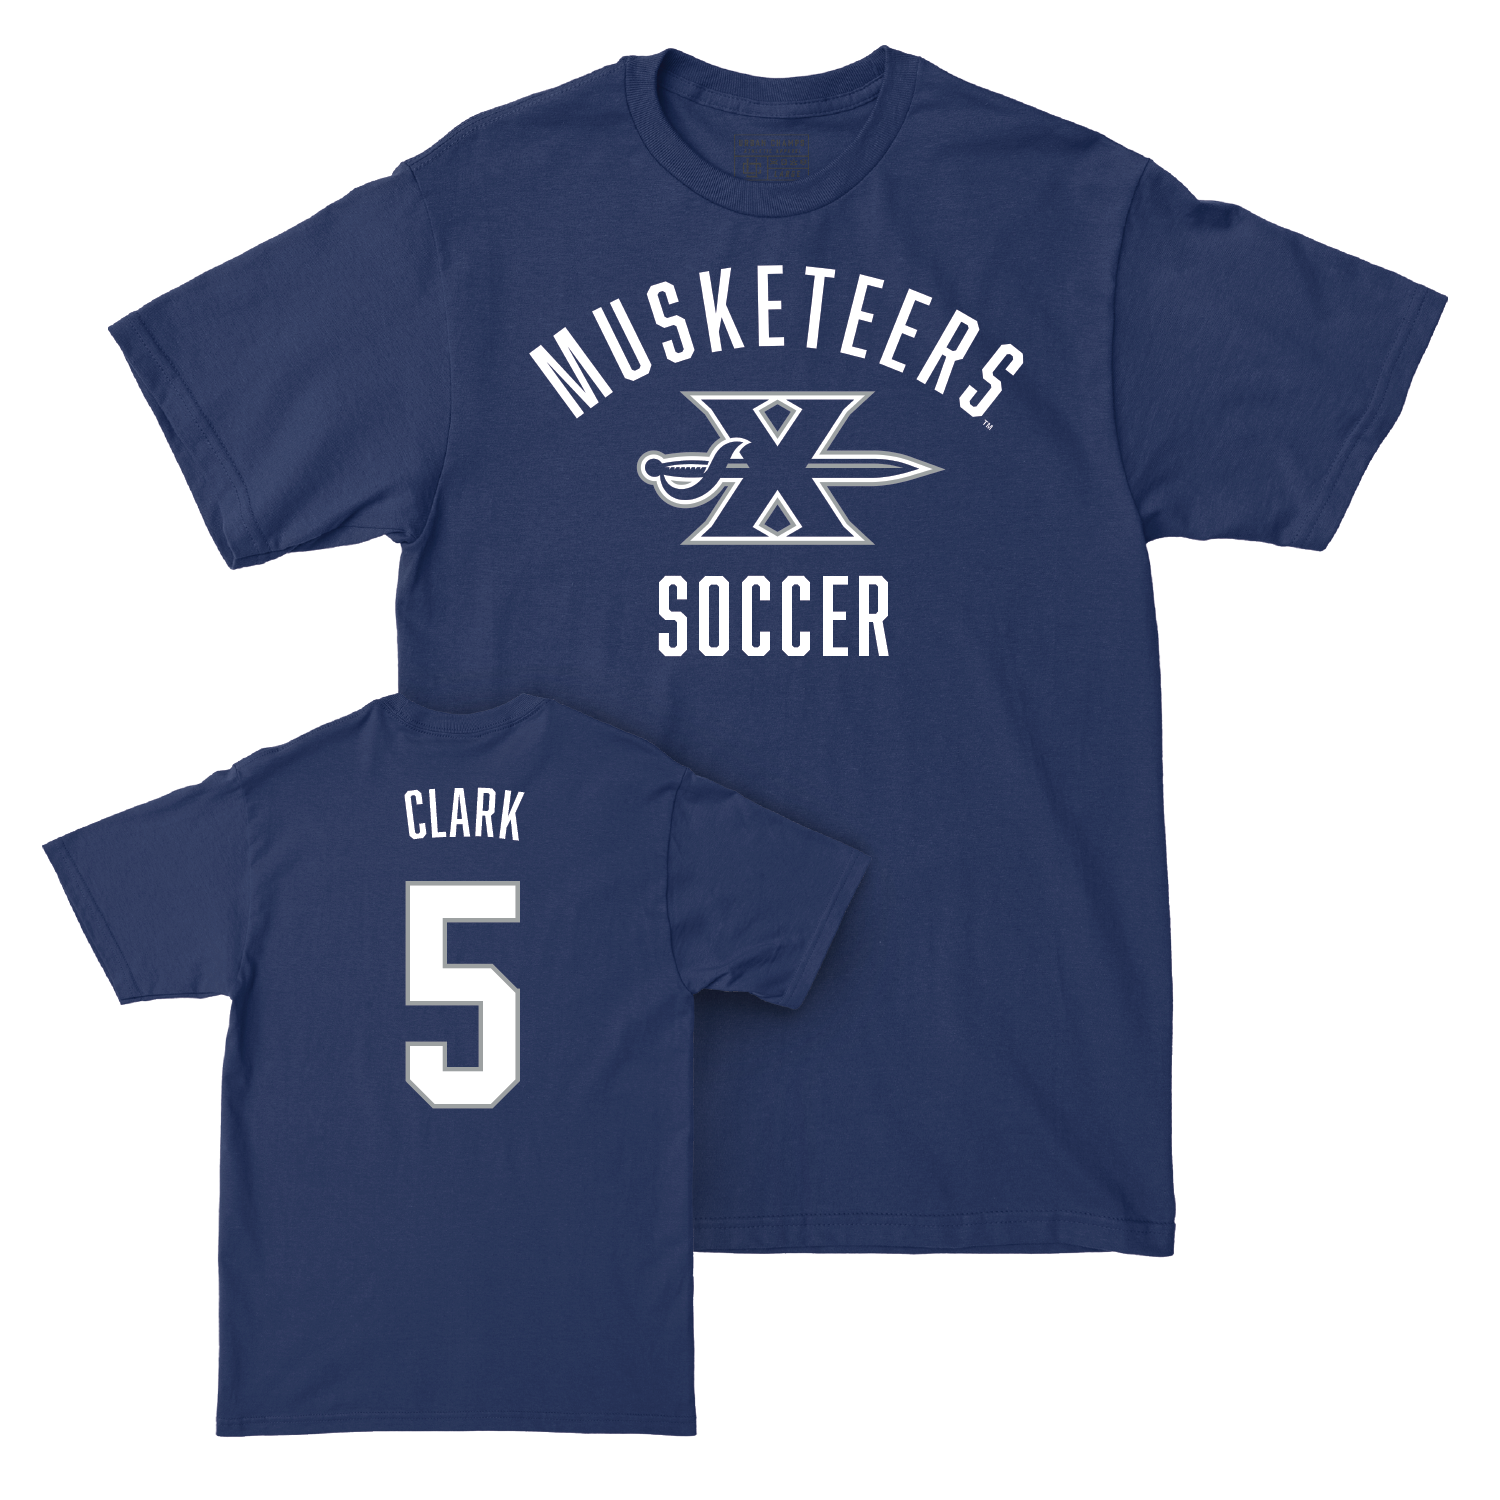 Women's Soccer Navy Classic Tee - Kennedy Clark Youth Small